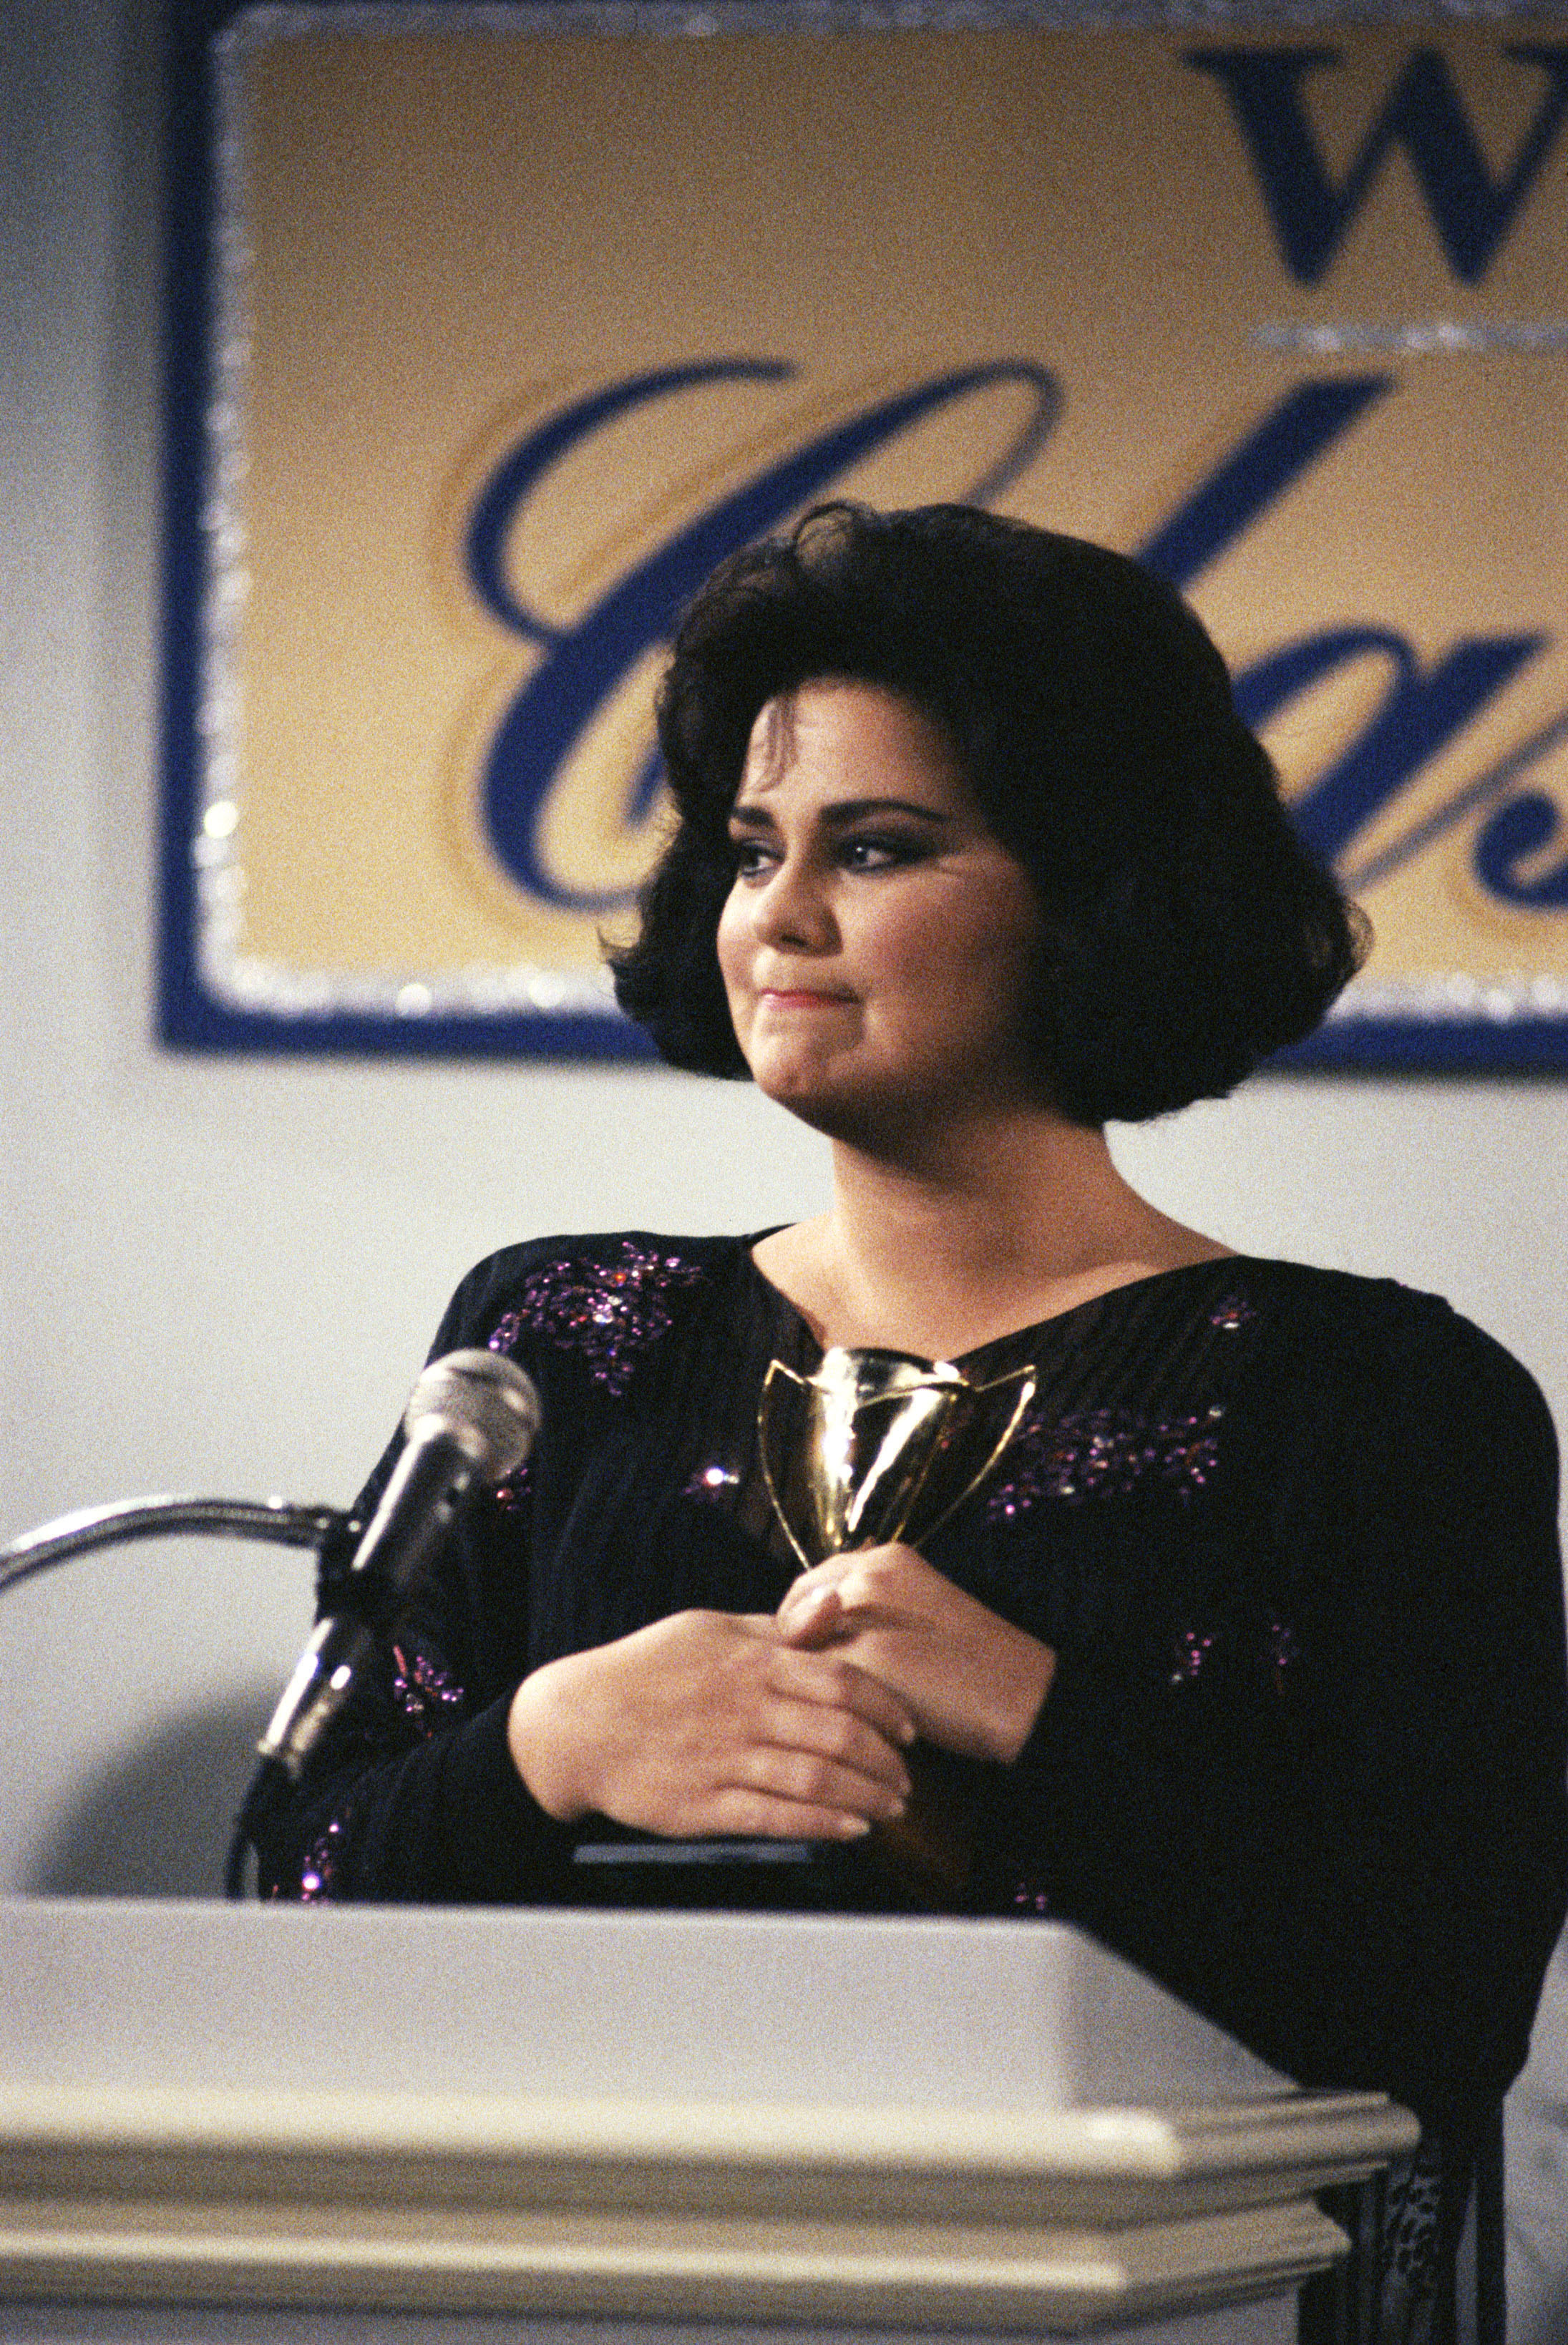 Delta Burke as Suzanne Sugarbaker on "Designing Women" on January 1, 1990 in Los Angeles | Source: Getty Images